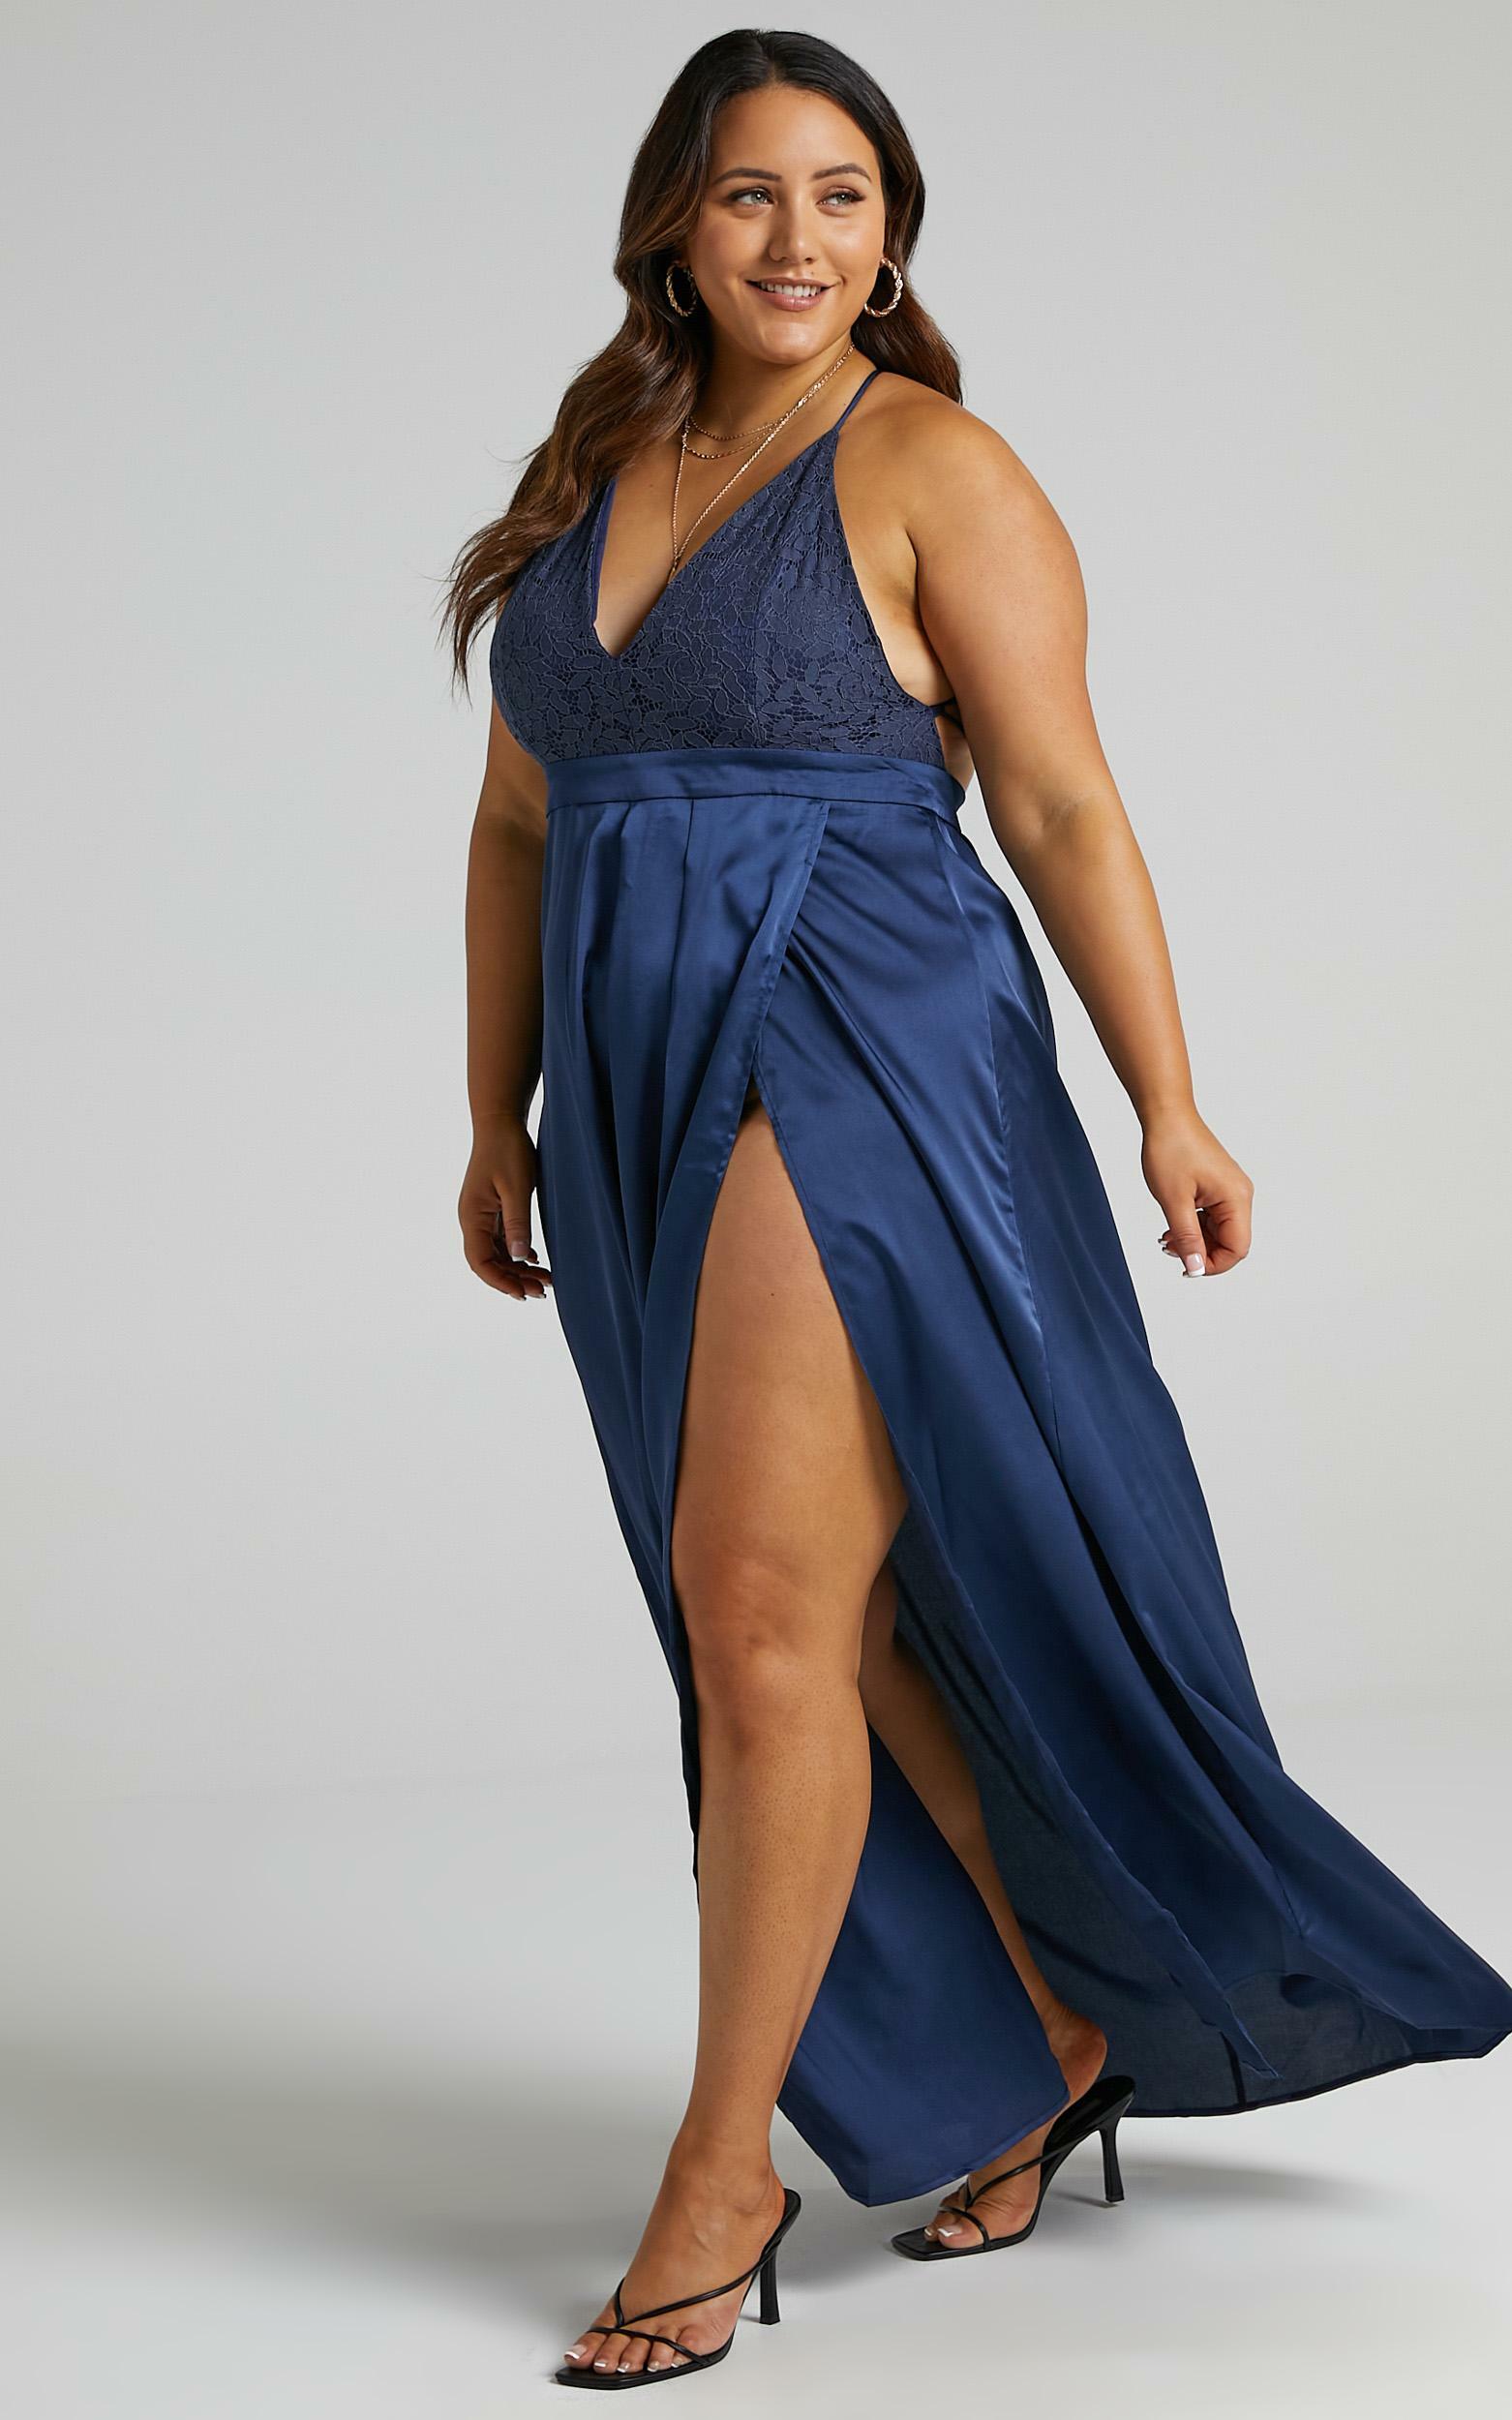 Inspired Tribe Plunge Neckline Thigh Split Maxi Dress in Navy - 04, NVY3, hi-res image number null